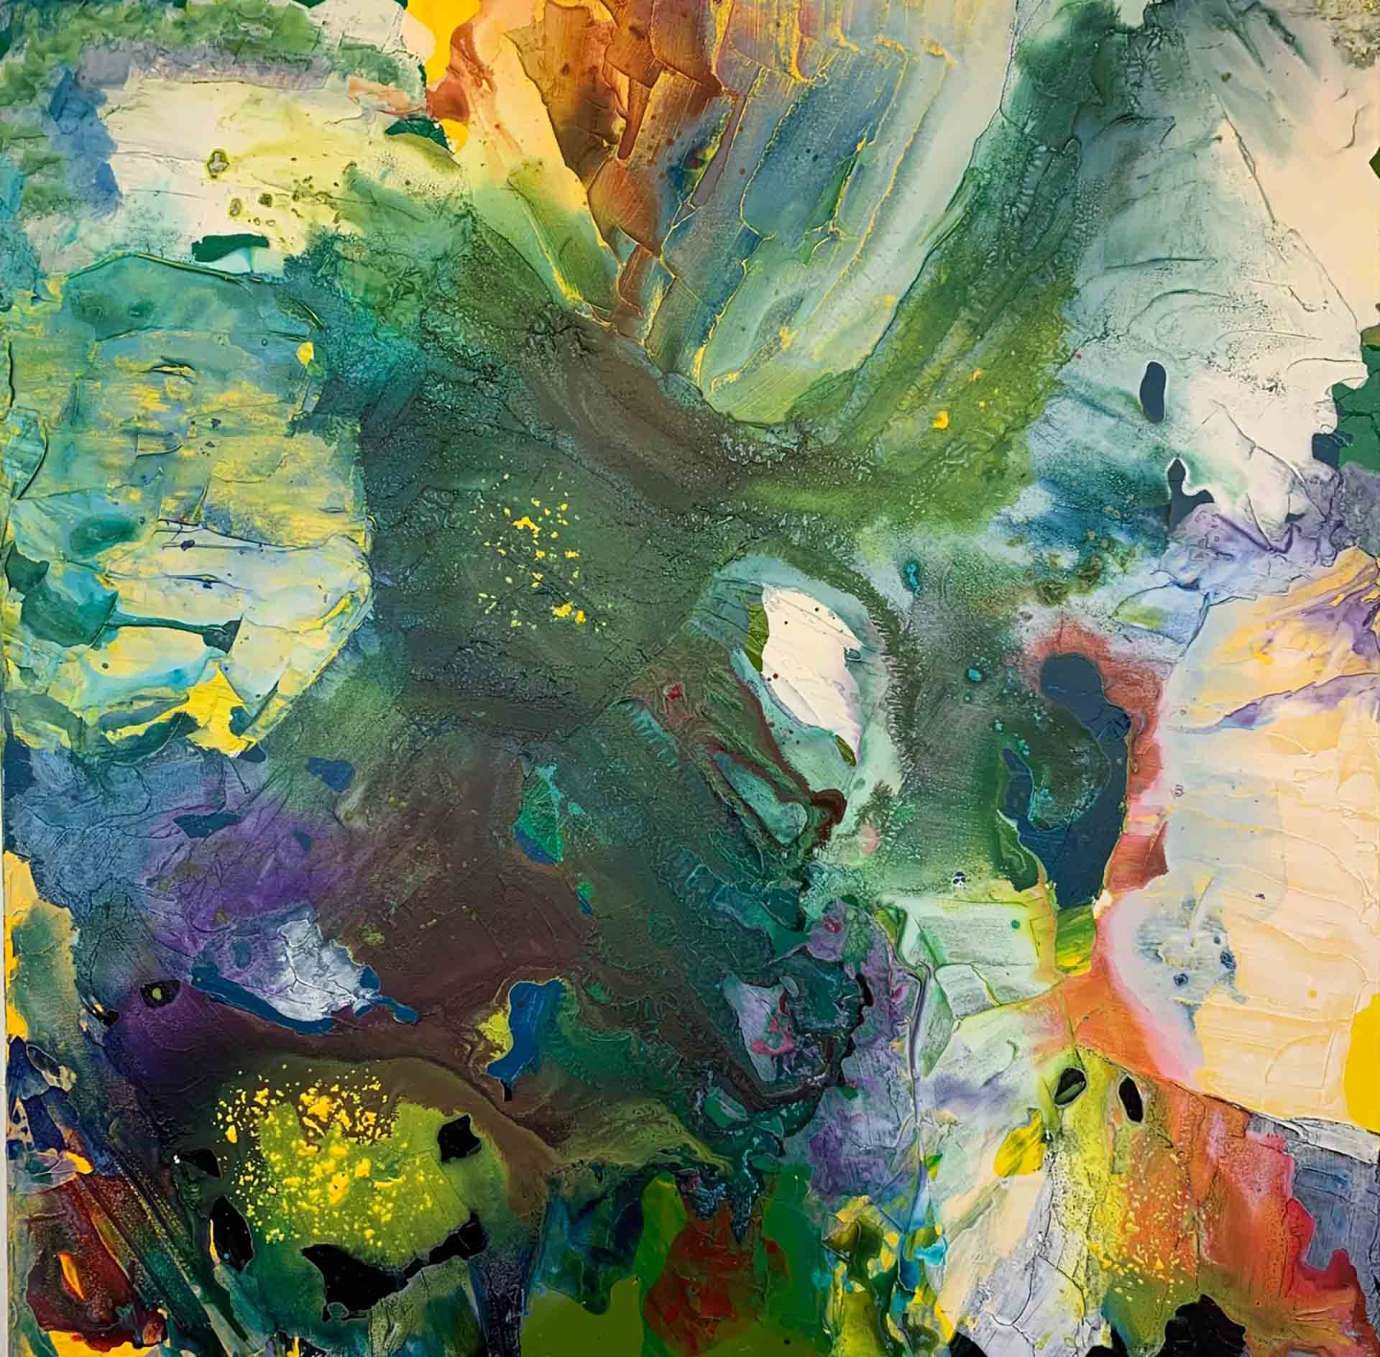 An abstract painting by Eduardo Lapentia featuring paint in green, yellow, orange blue, and off white